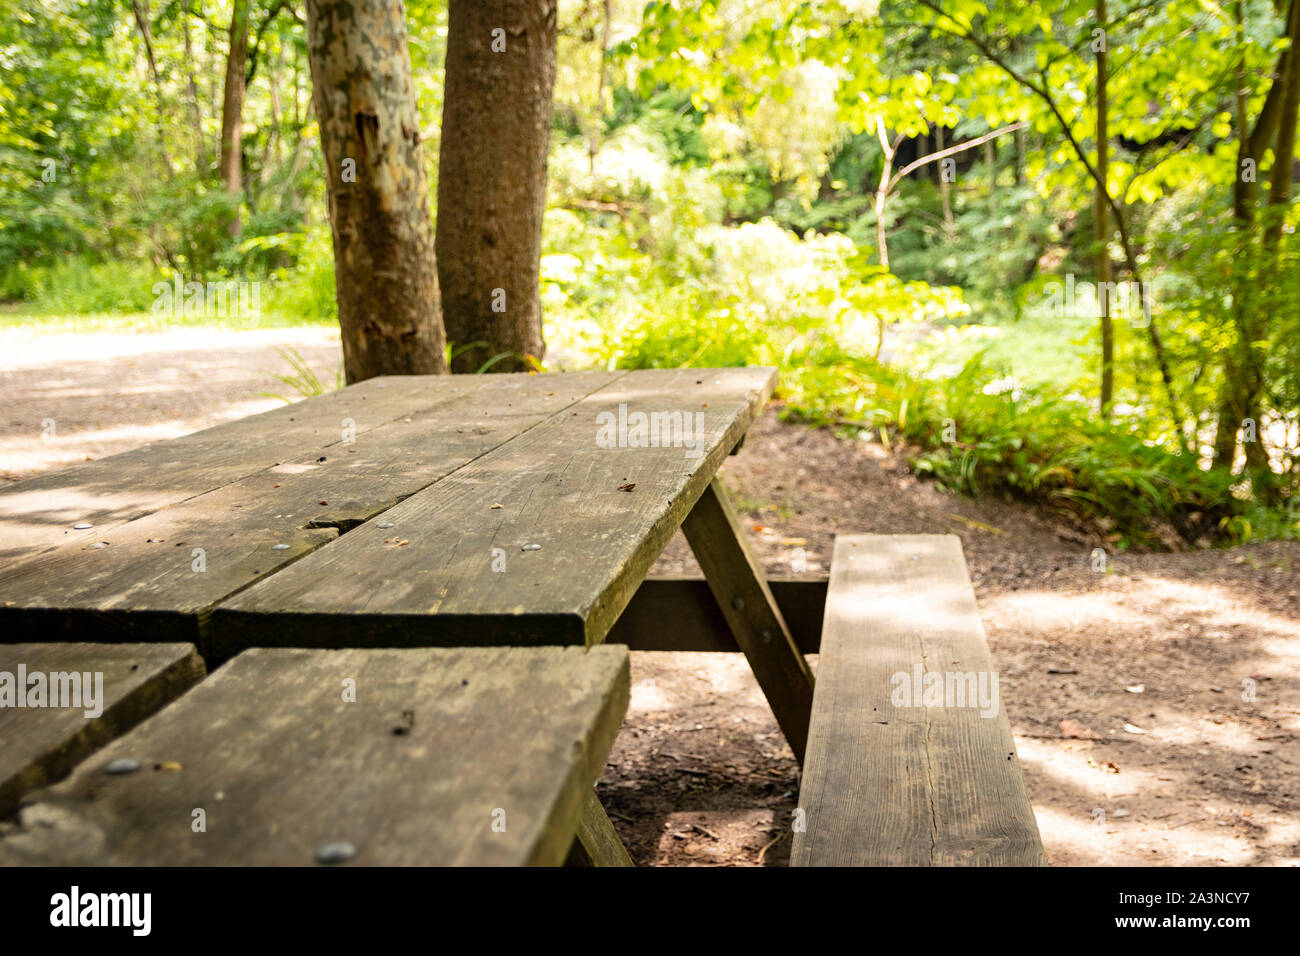 Wooden picnic table at recreational campsite or picnic site. Stock Photo